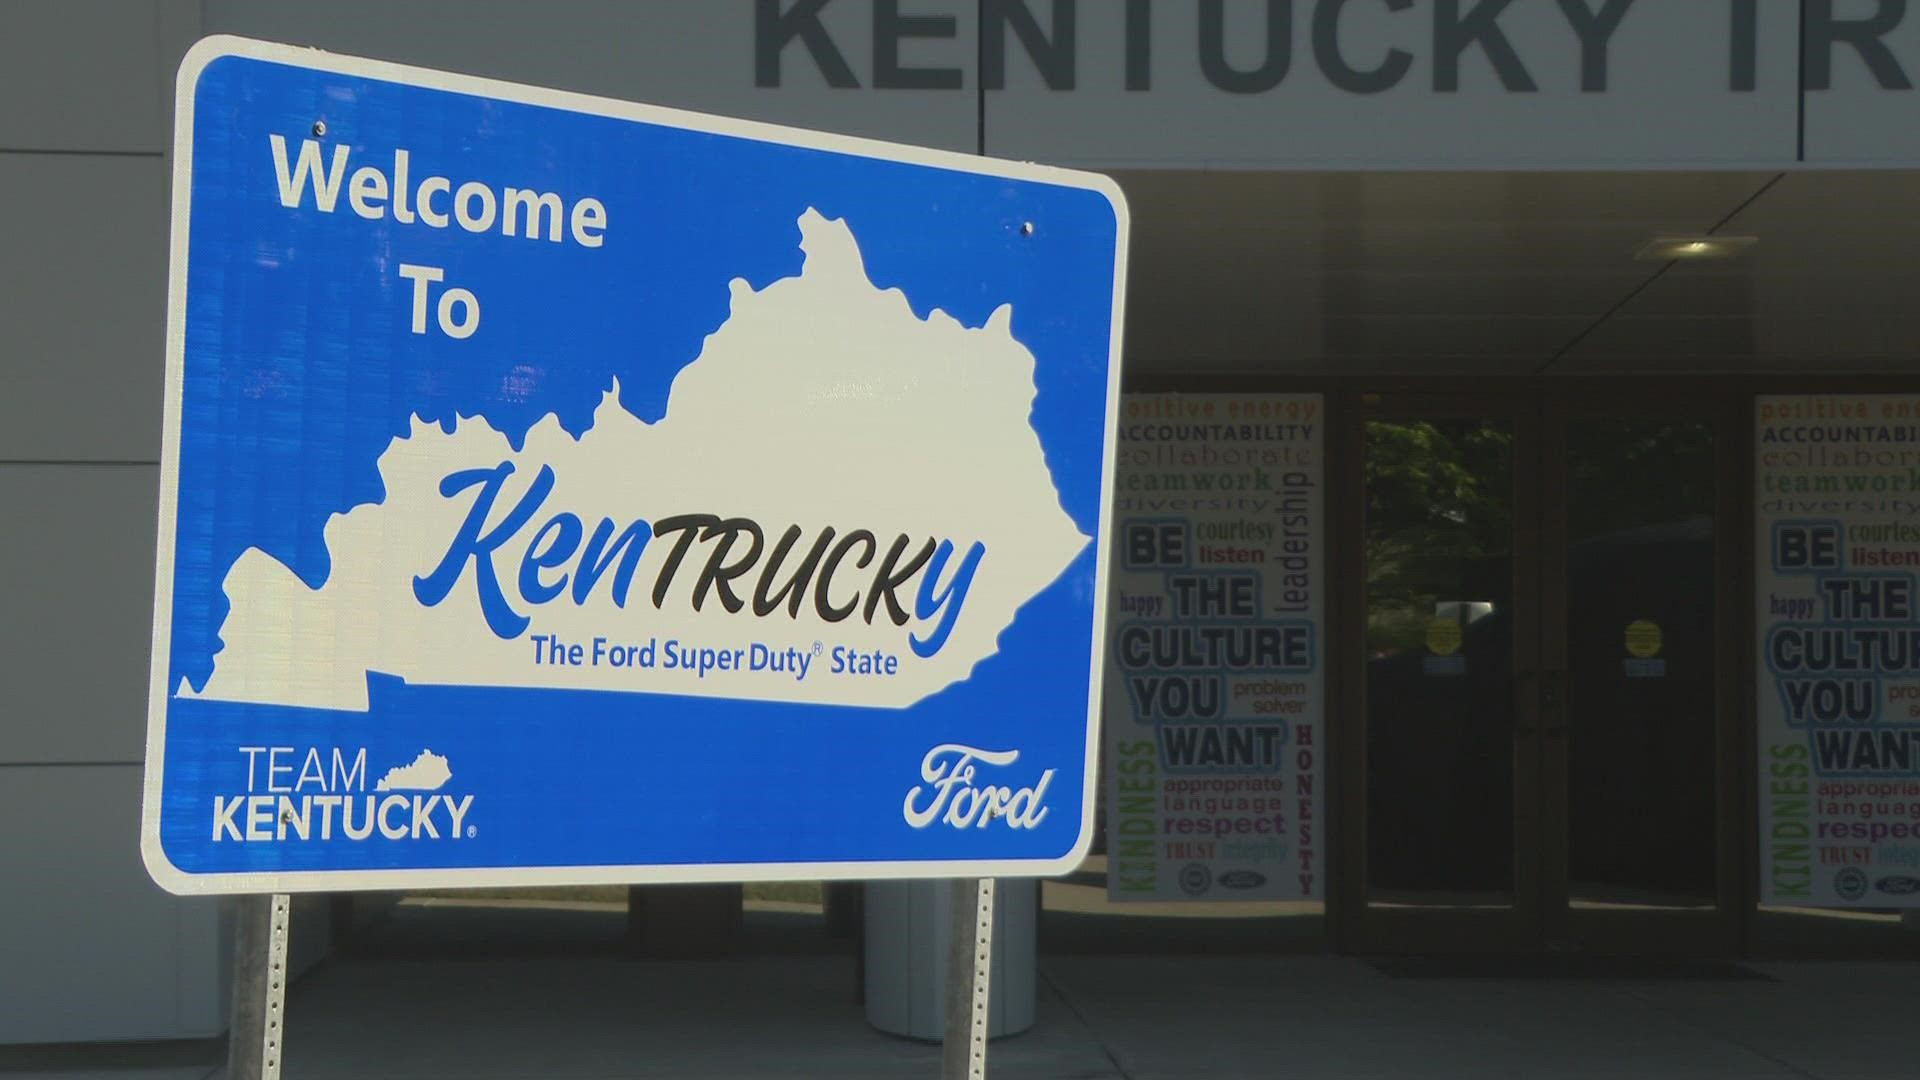 According to Gov. Beshear, Ford supports nearly 120,000 direct and indirect jobs in the state and has contributed more than $11.8 billion to Kentucky's economy.